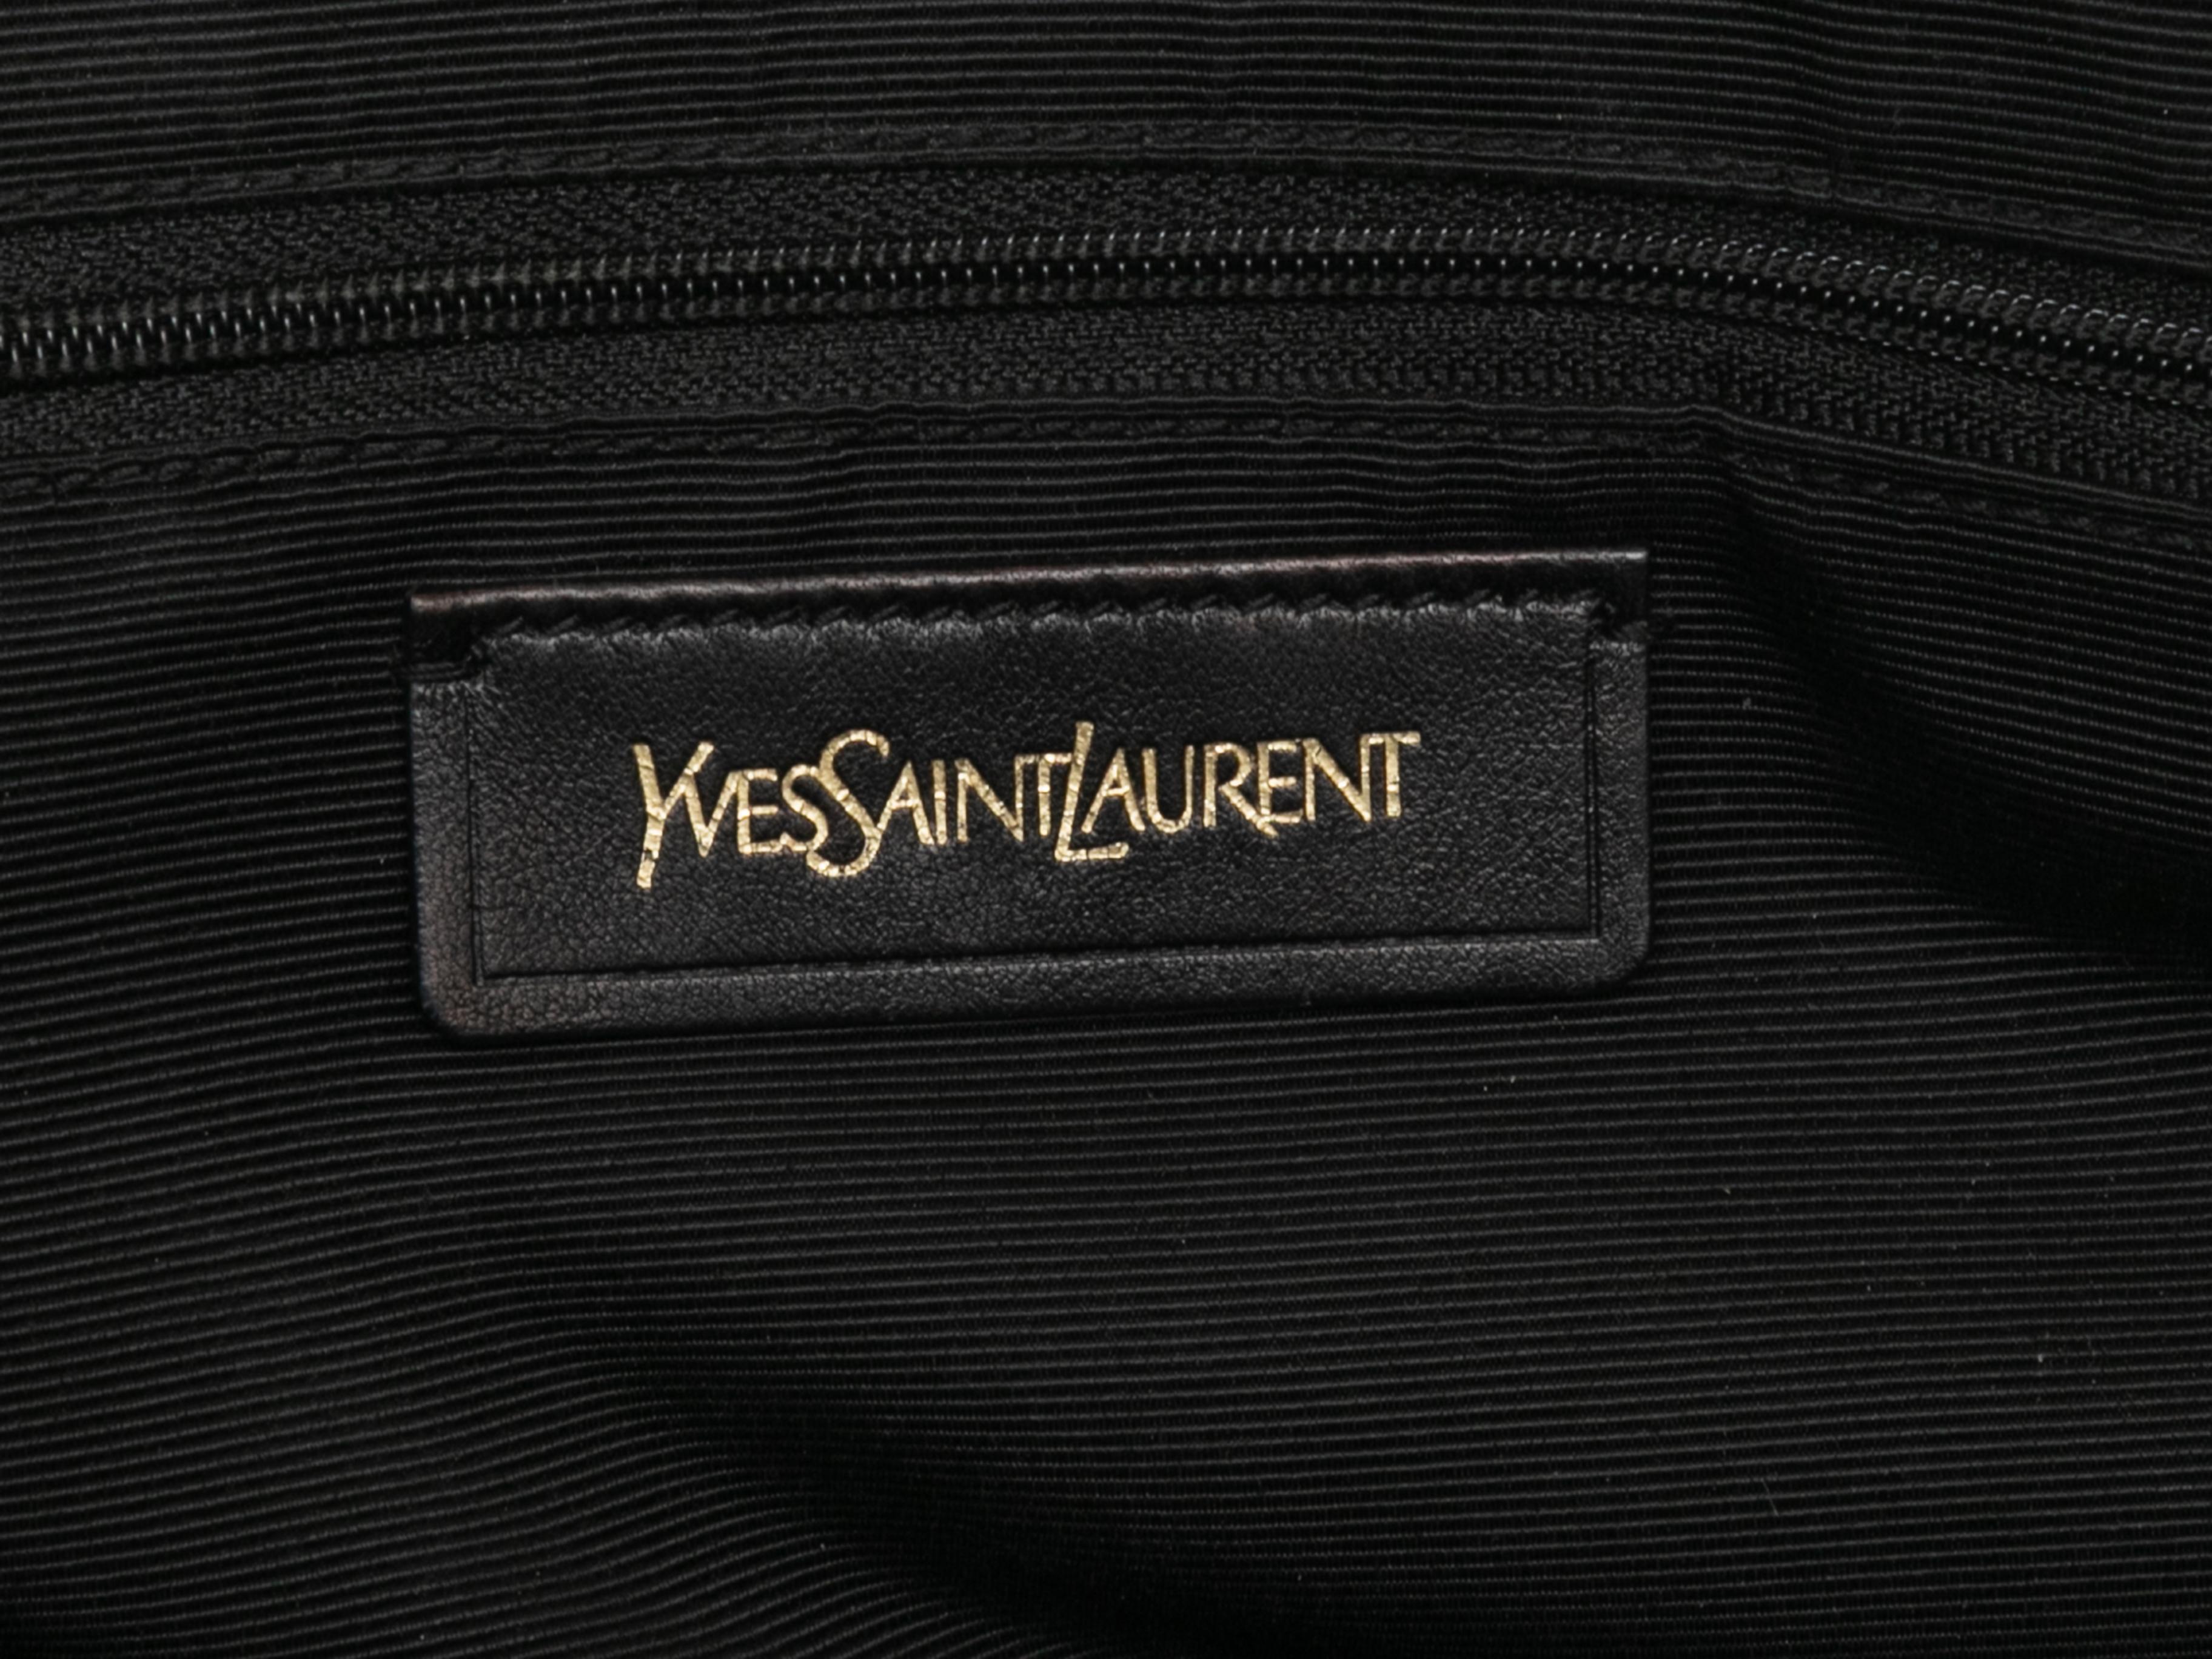 Grey Yves Saint Laurent Small Muse Bag. The Small Muse Bag features a leather body, gold-tone hardware, dual flat top handles, and a top zip closure. 17